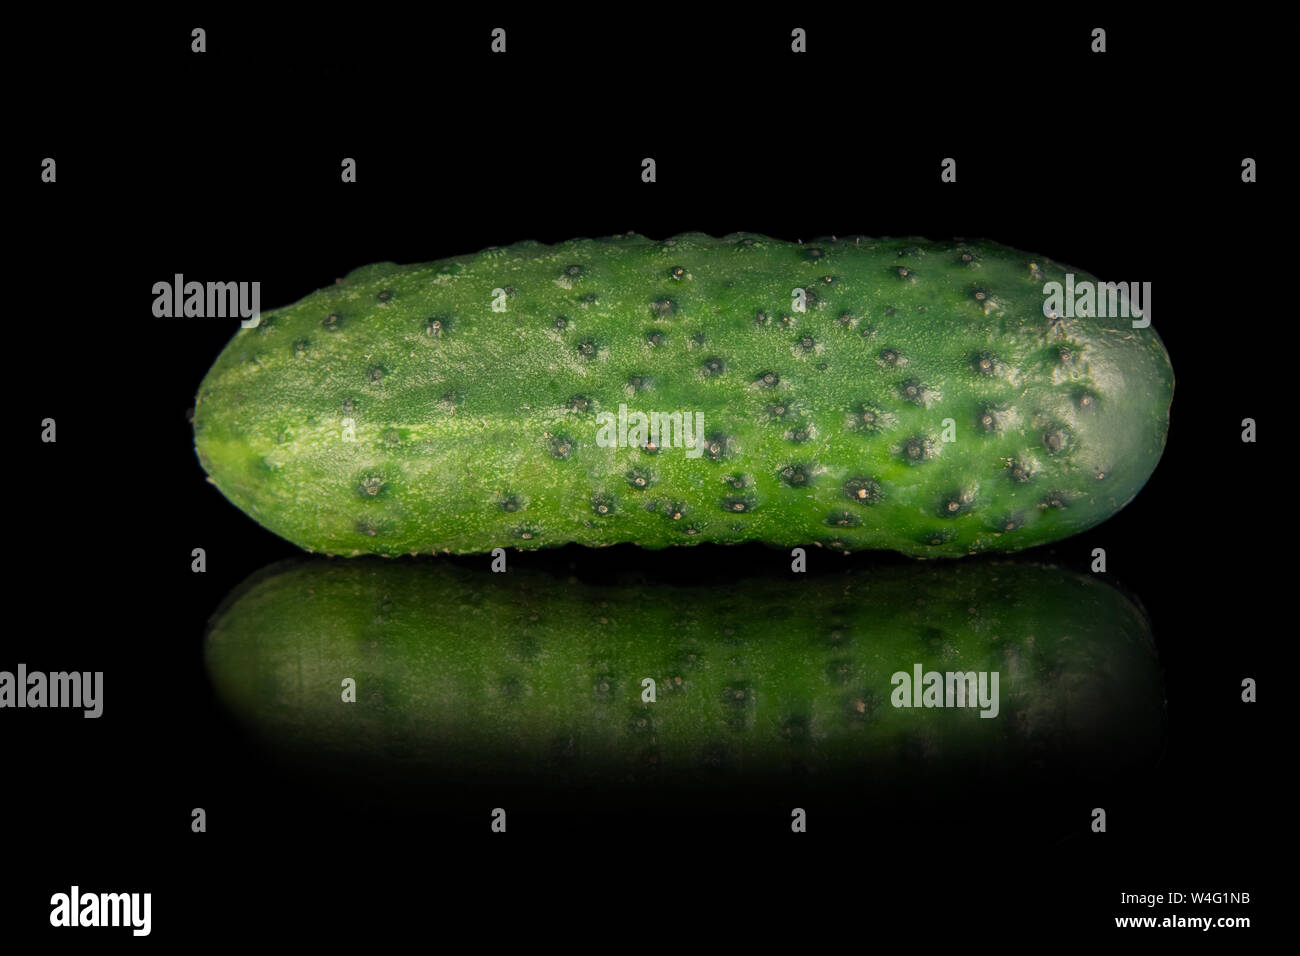 Green cucumber (gherkin) isolated on a black background Stock Photo